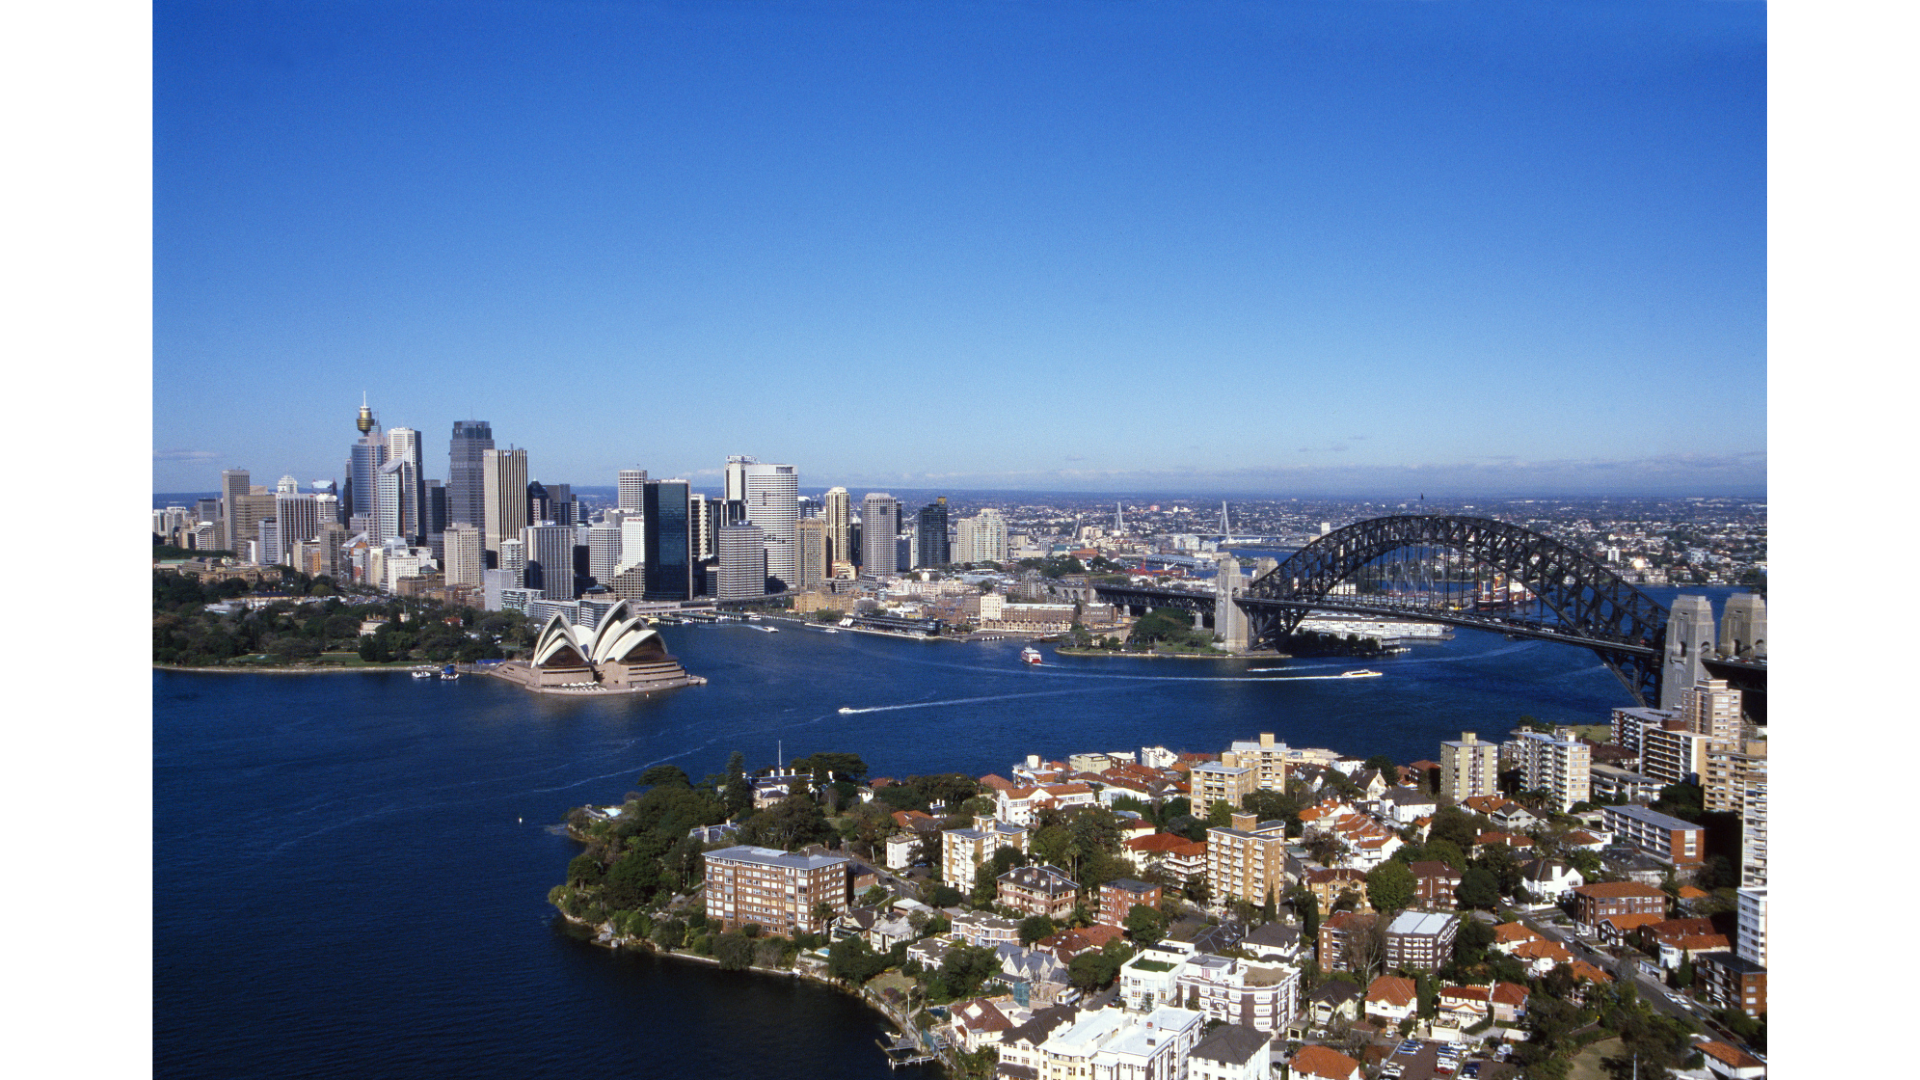 Sydney Aerial view with buildings and houses - Price Gap Between Houses and Apartments